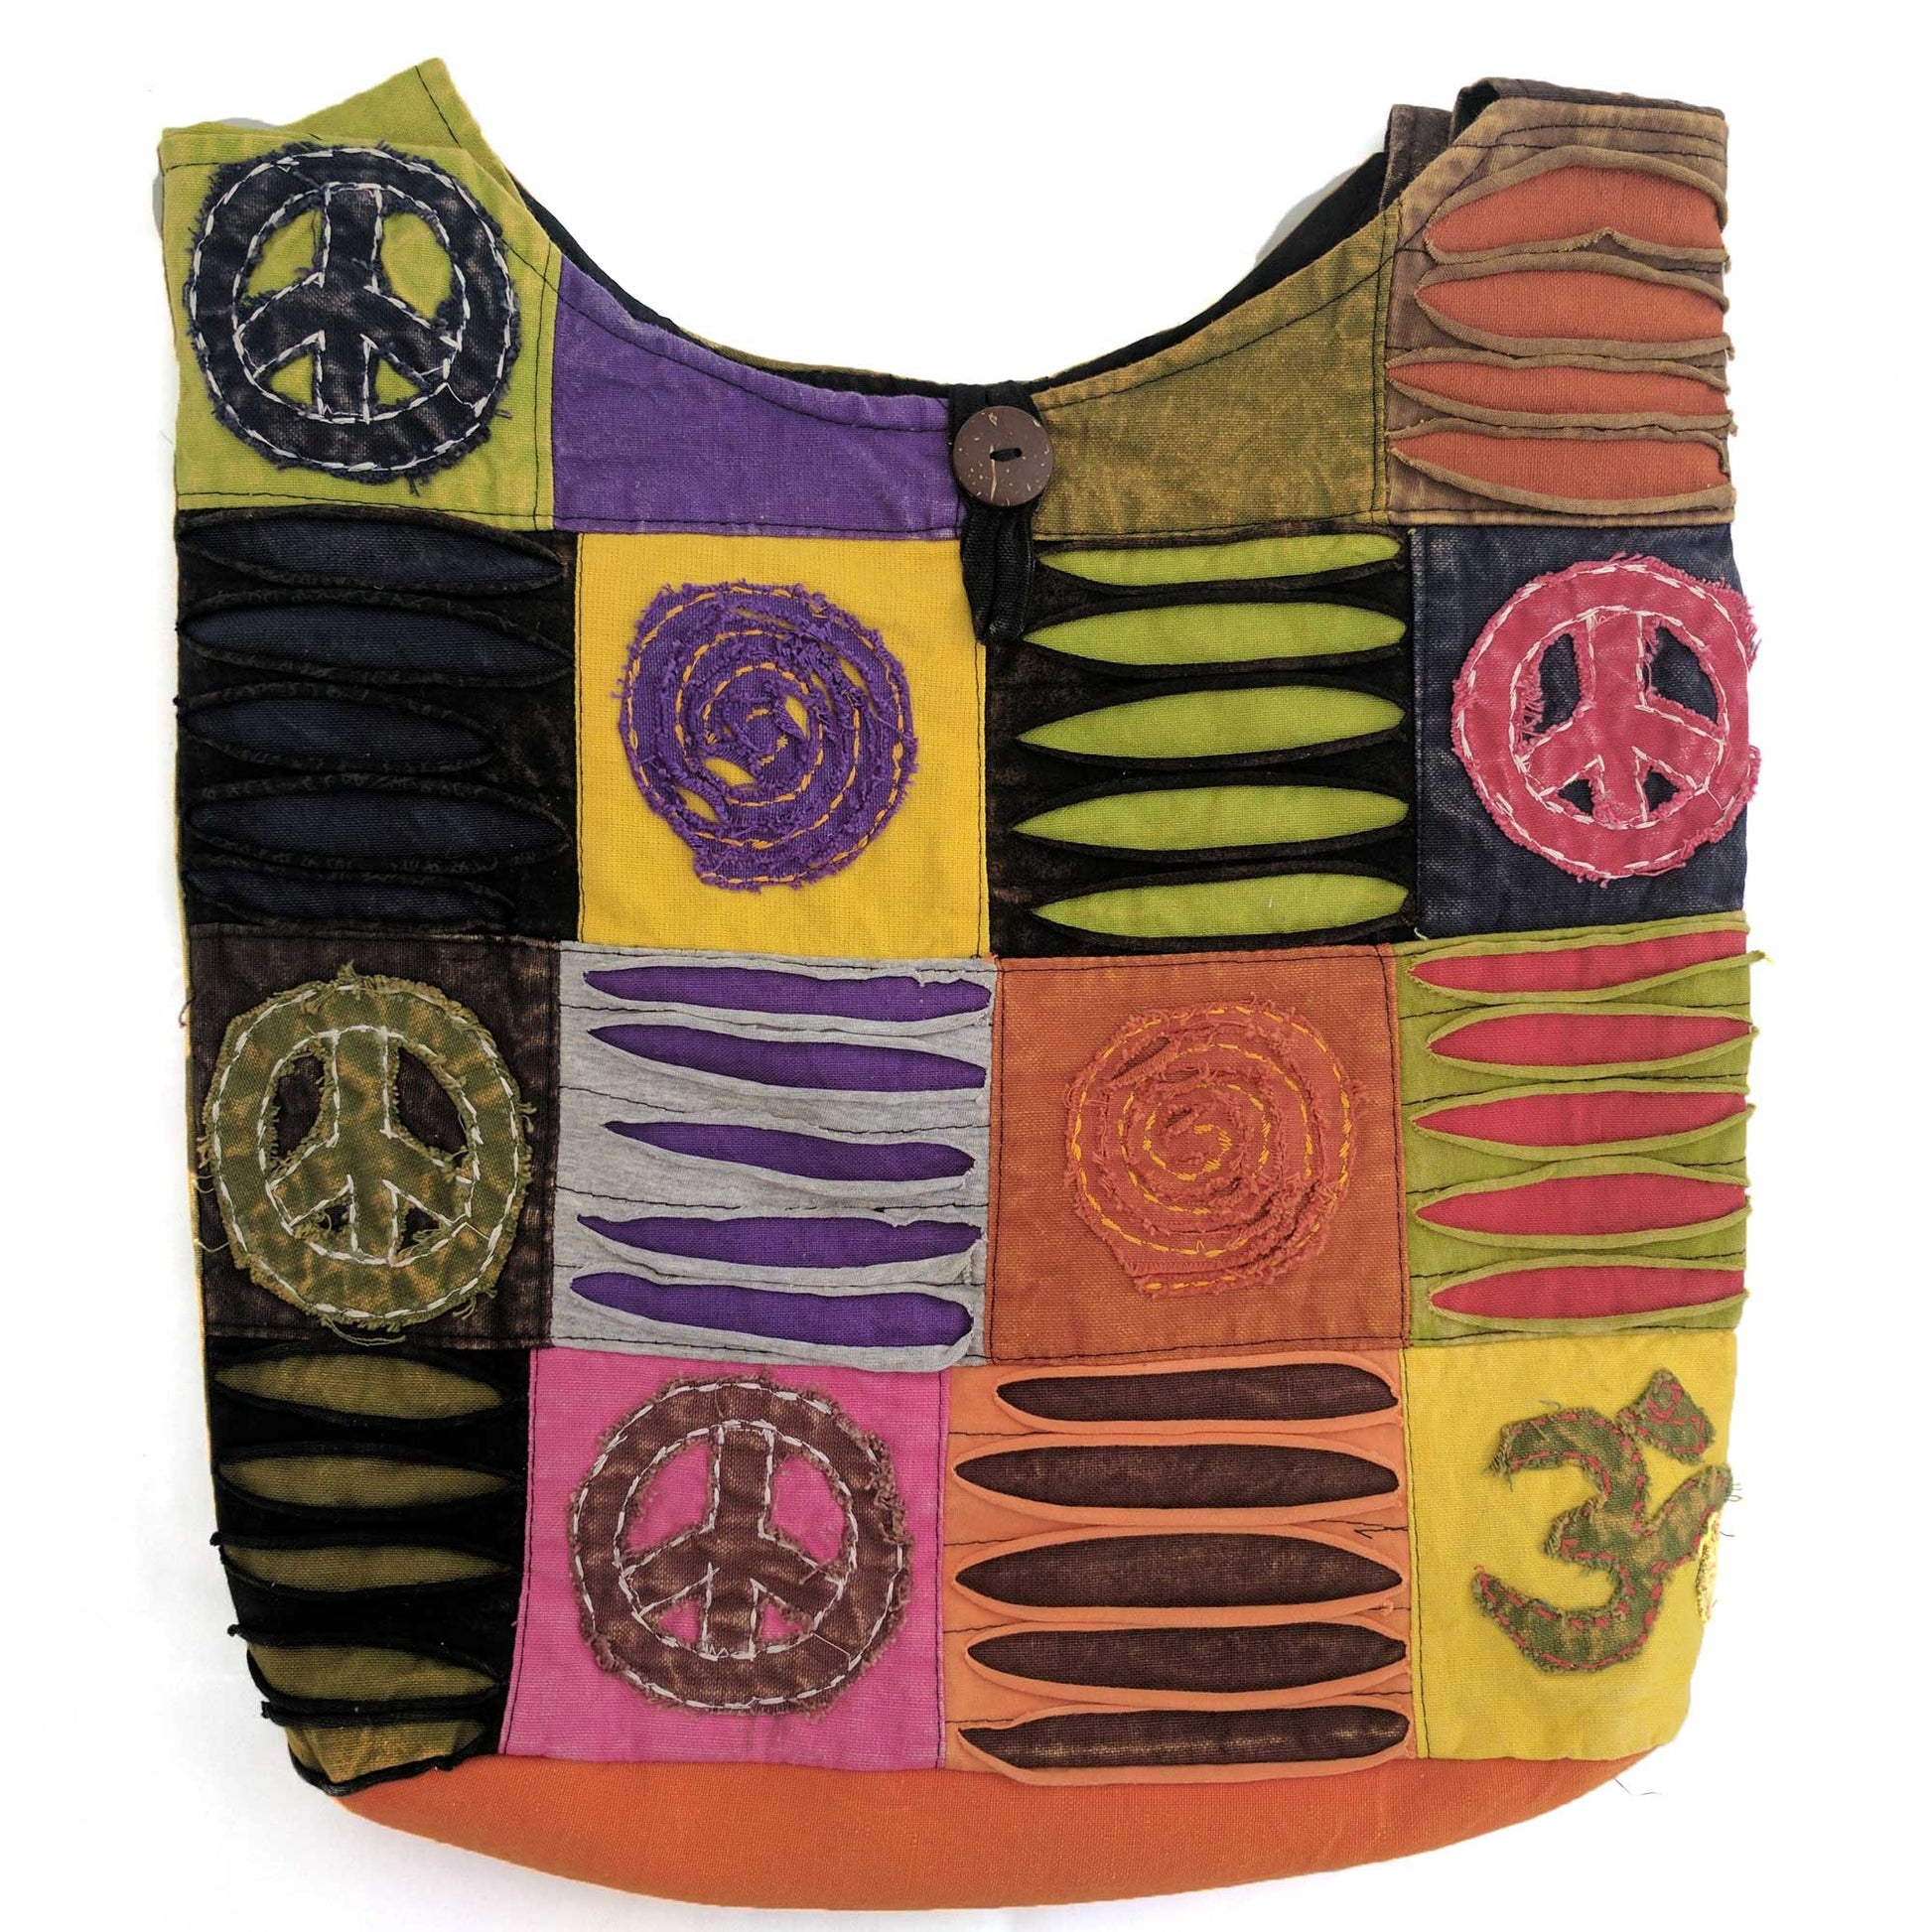 Cotton Shoulder Bag with embroidered peace symbol